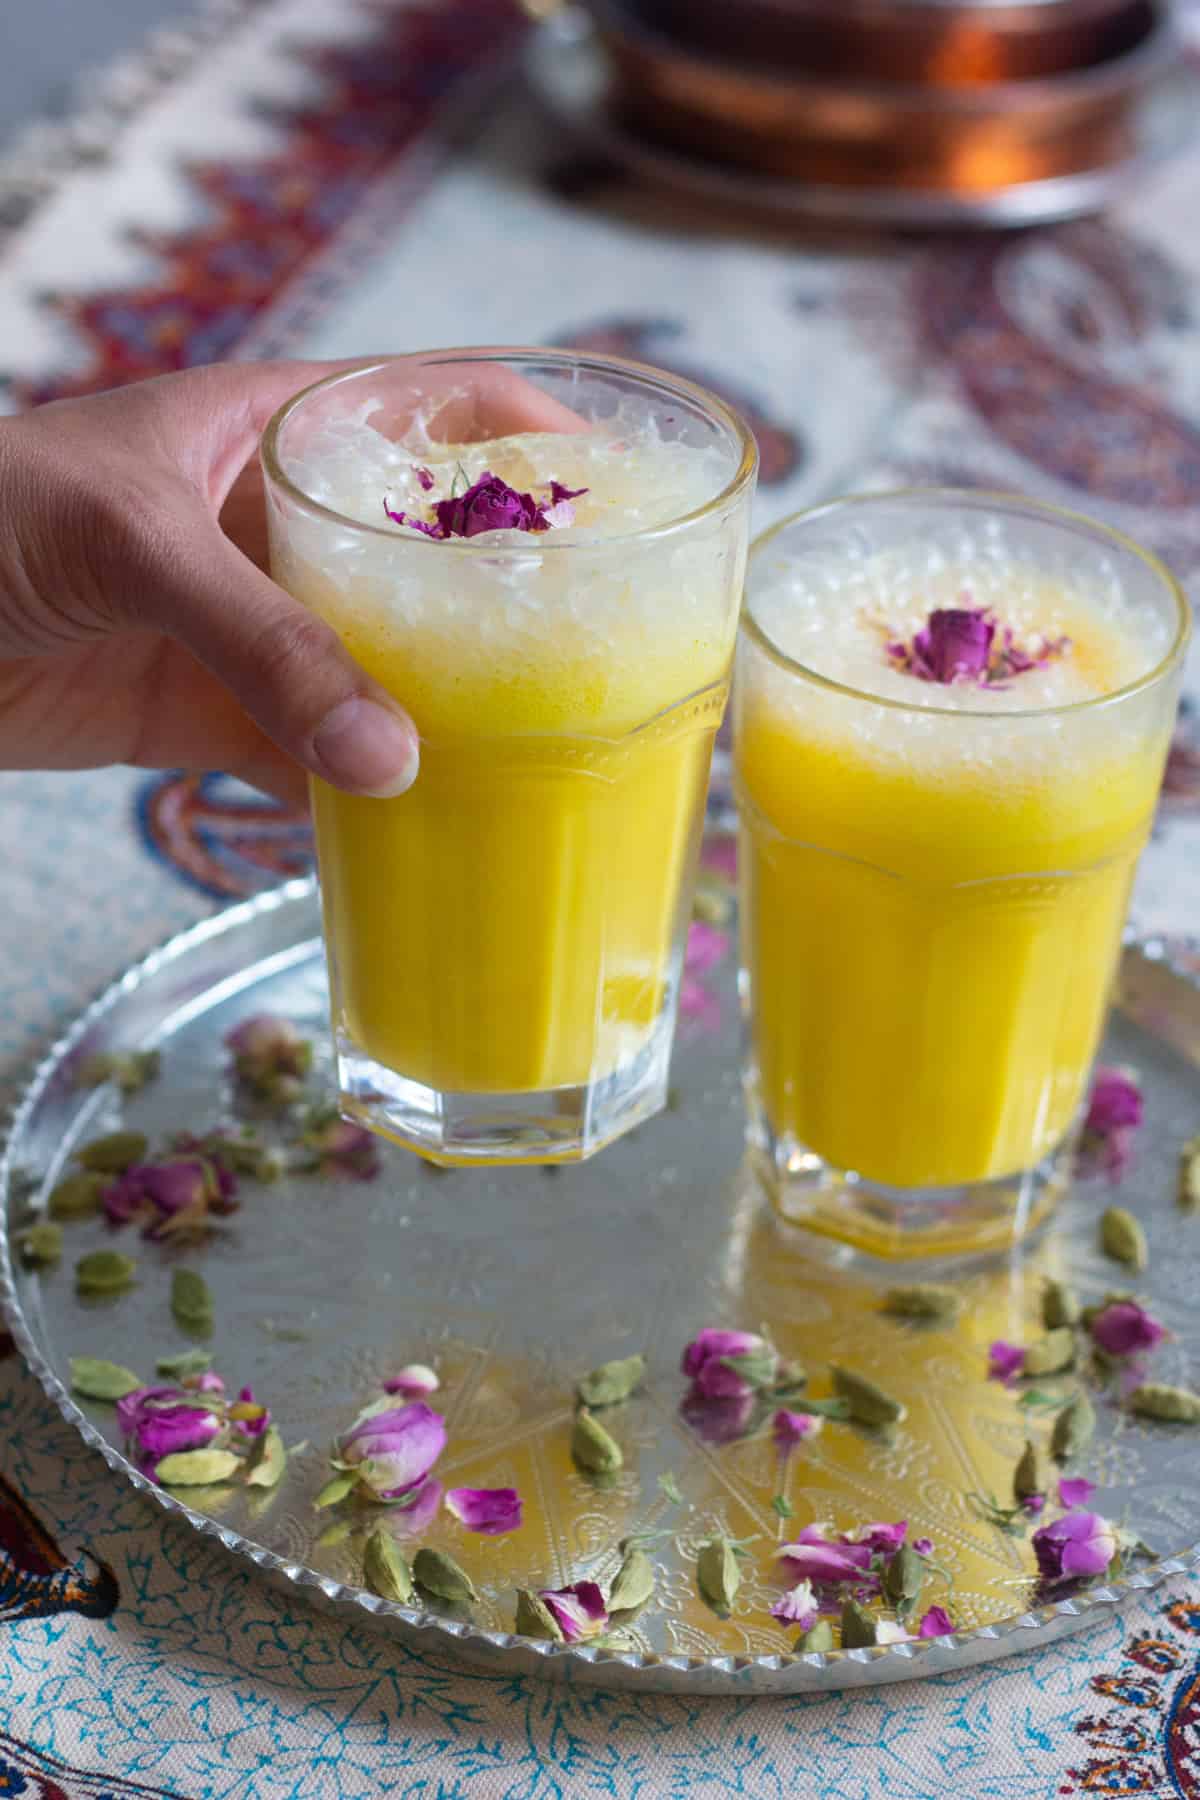 This saffron milkshake recipe that I'm sharing with you today is also a new way to use two of my all time favorite flavors that also happen to be the flavors of Iran's traditional ice cream as well.